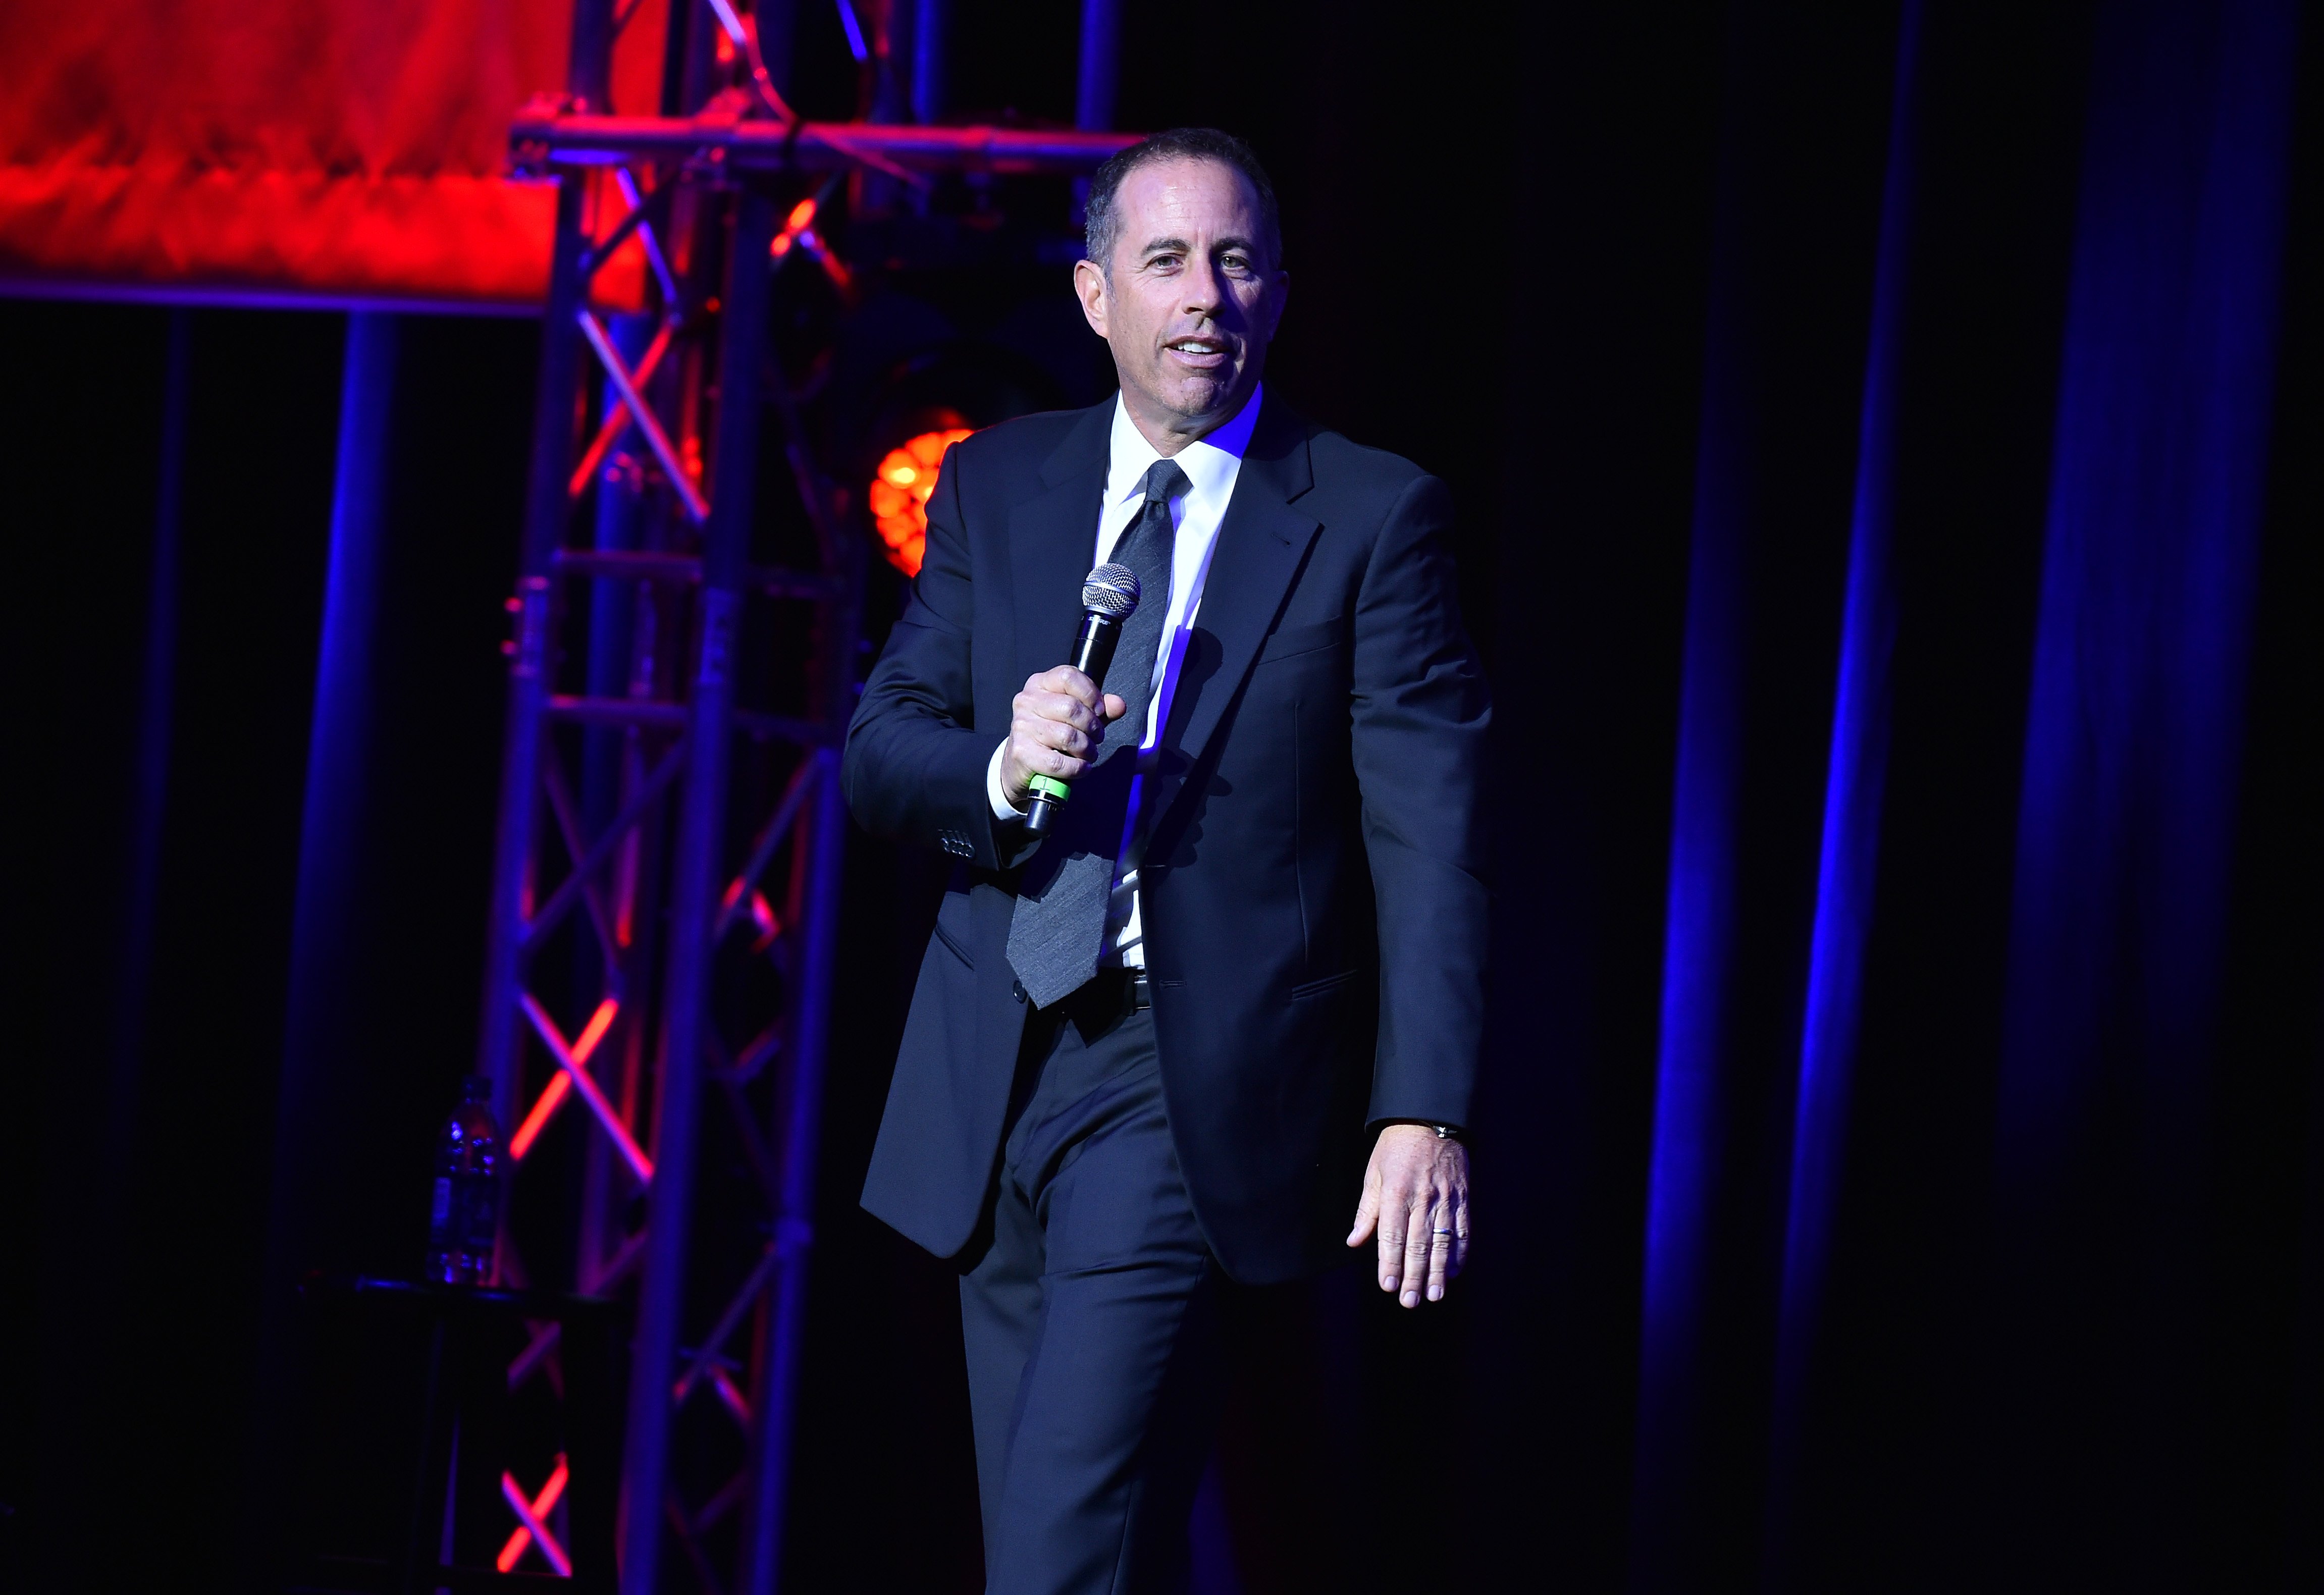 Jerry Seinfeld performs on stage during 10th Annual Stand Up For Heroes at The Theater at Madison Square Garden on November 1, 2016 in New York City